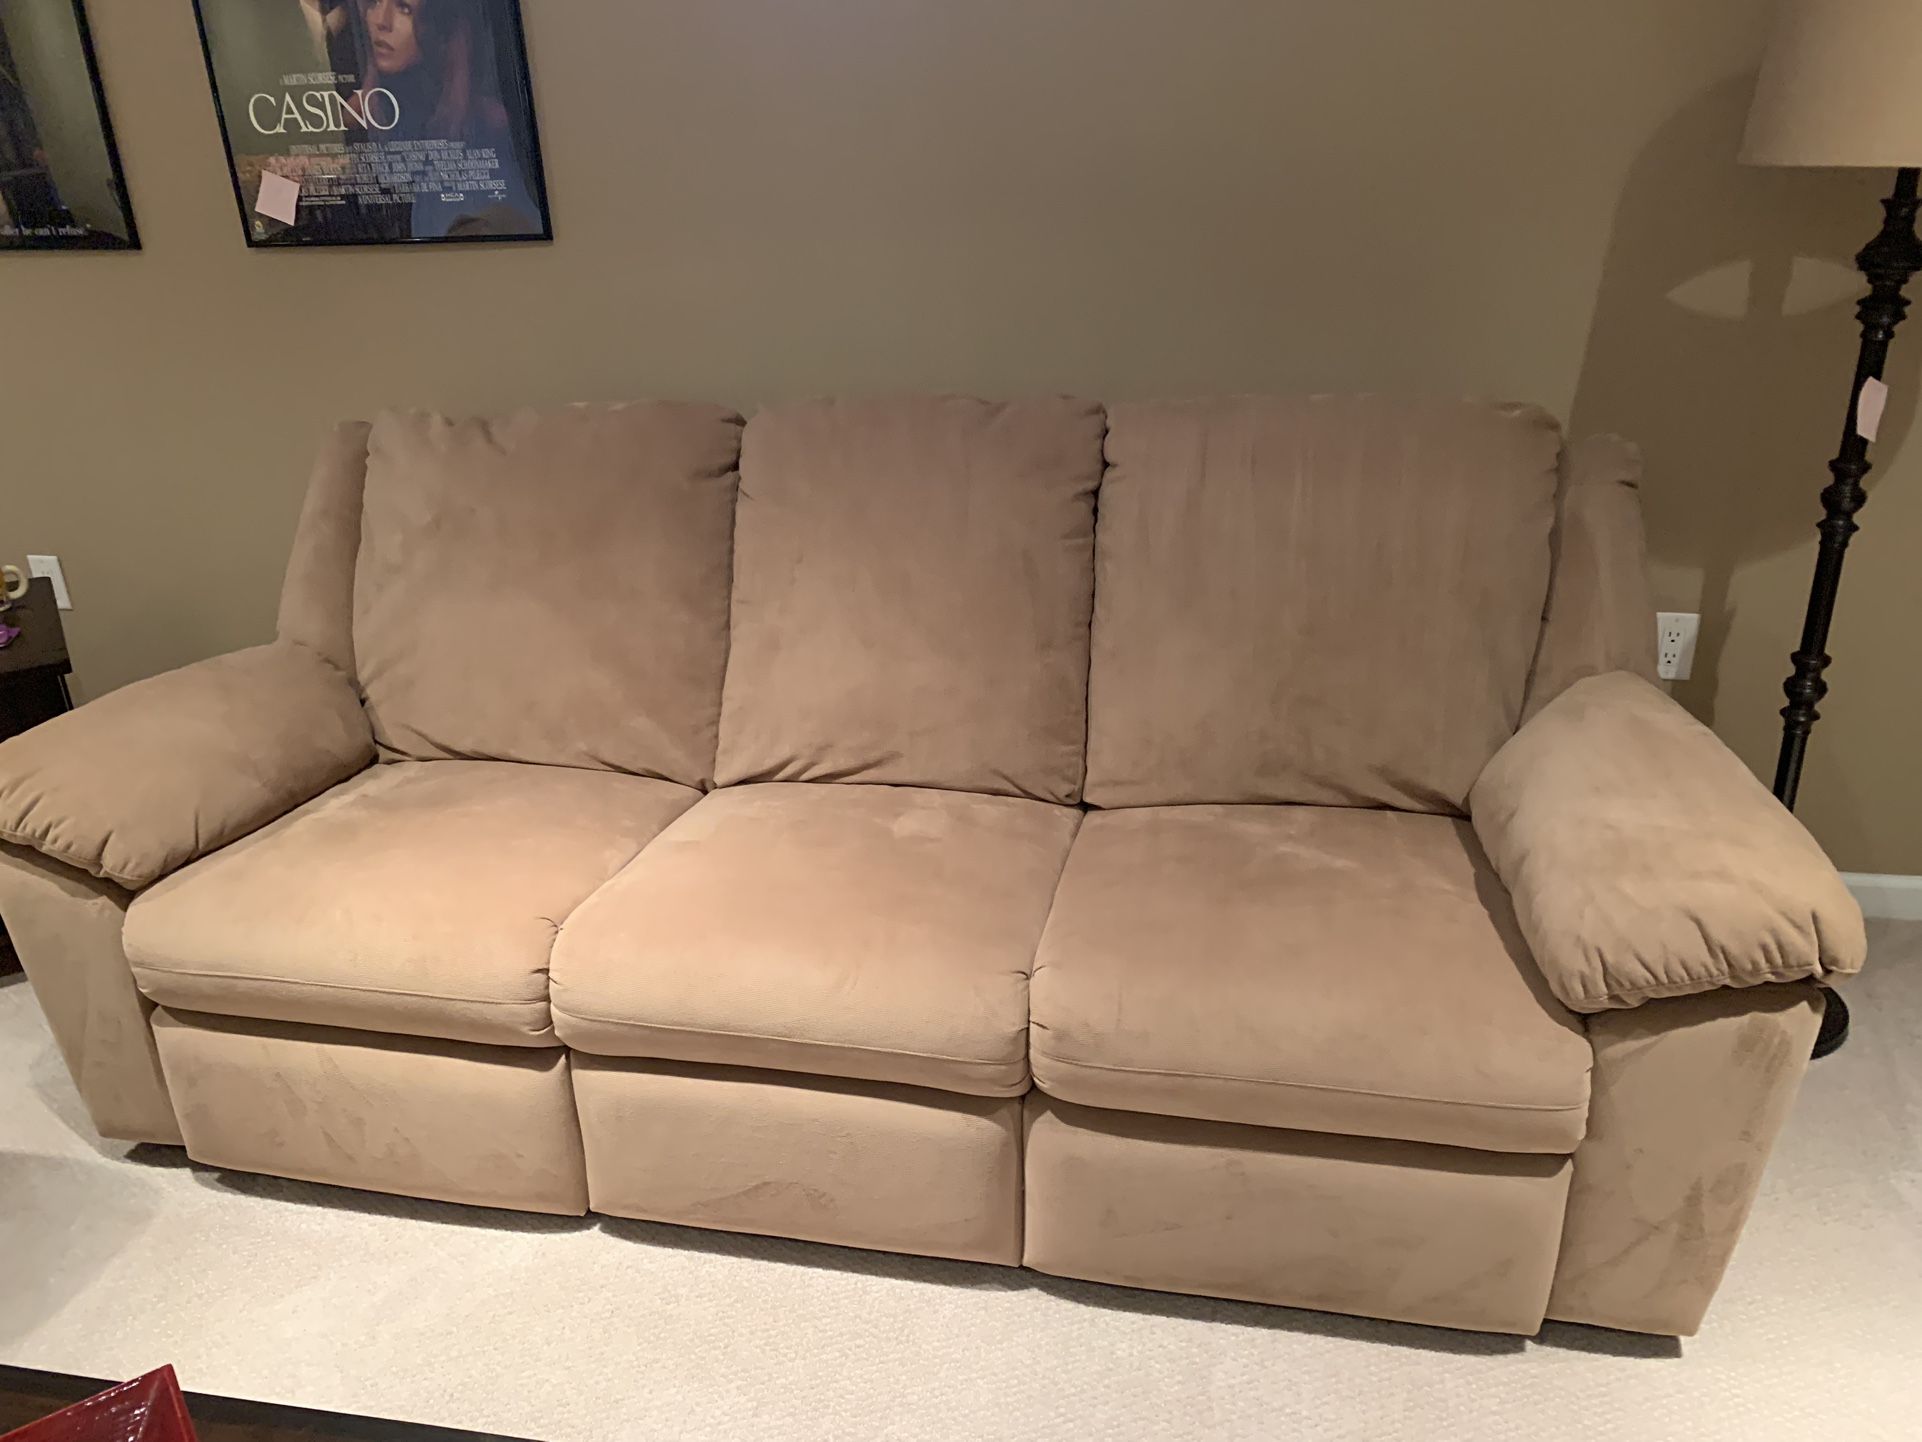 2 Media Sofas Will Sell Individual Each Prices Listed 